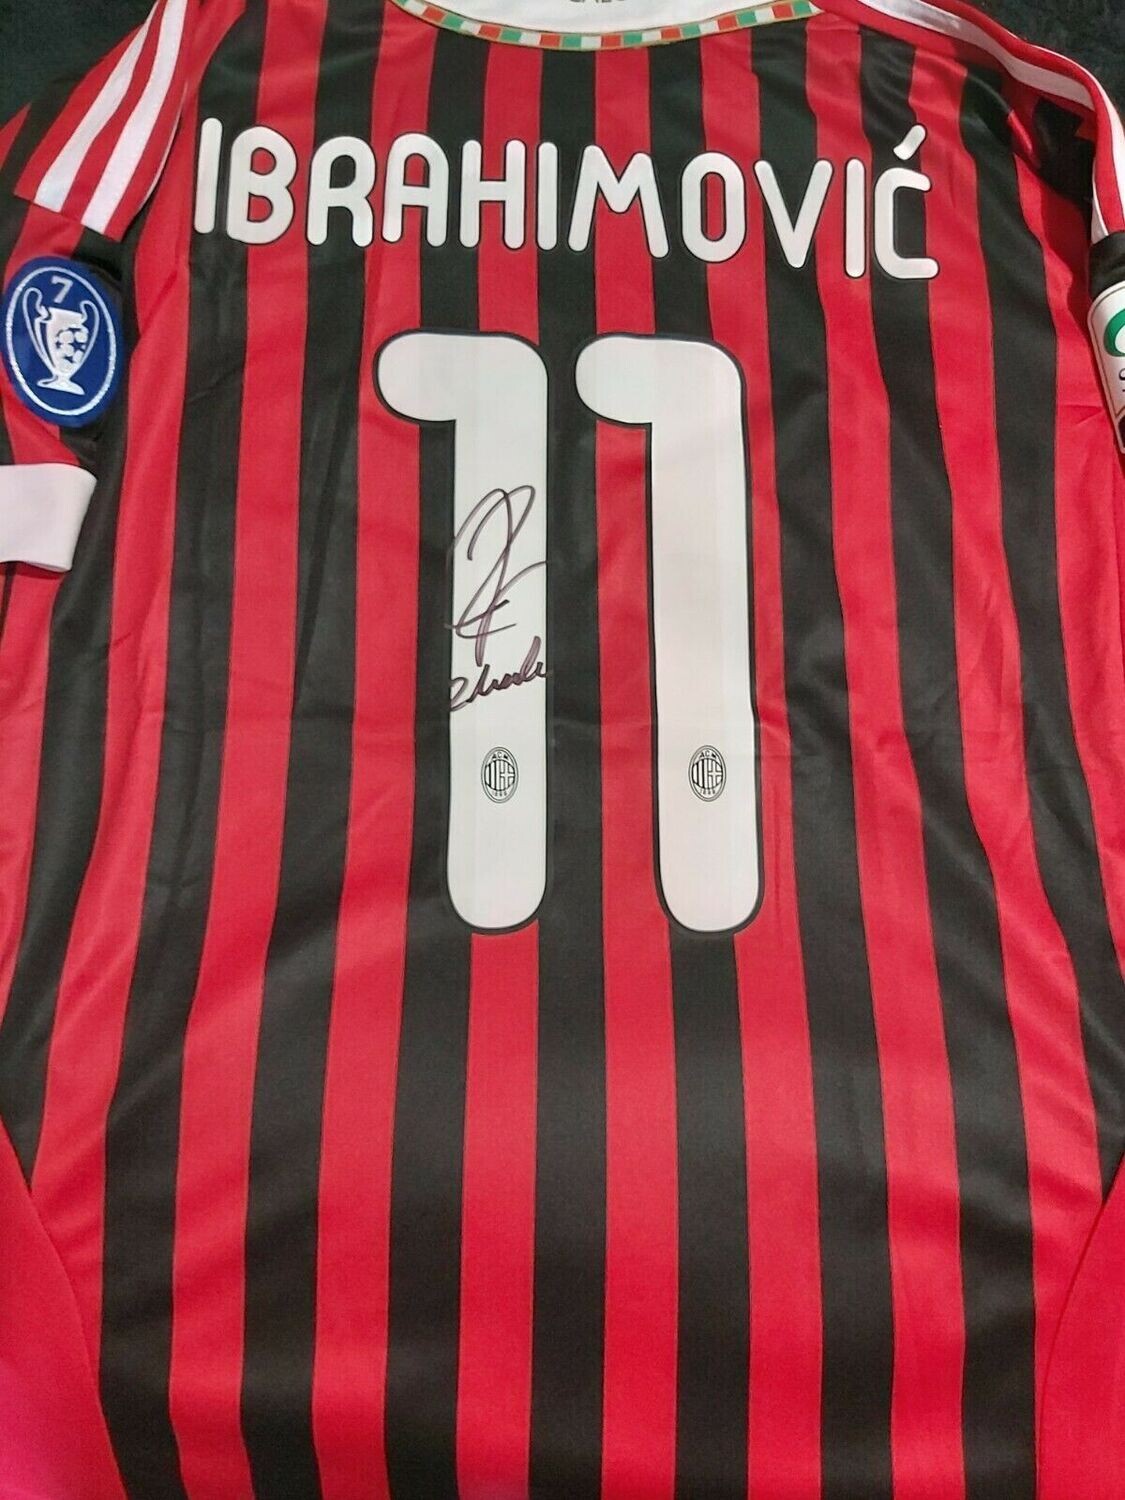 IBRAHIMOVIC MILAN  AUTOGRAFO AUTOGRAPH SIGNED AUTOGRAPH HAND SIGNED   SWS